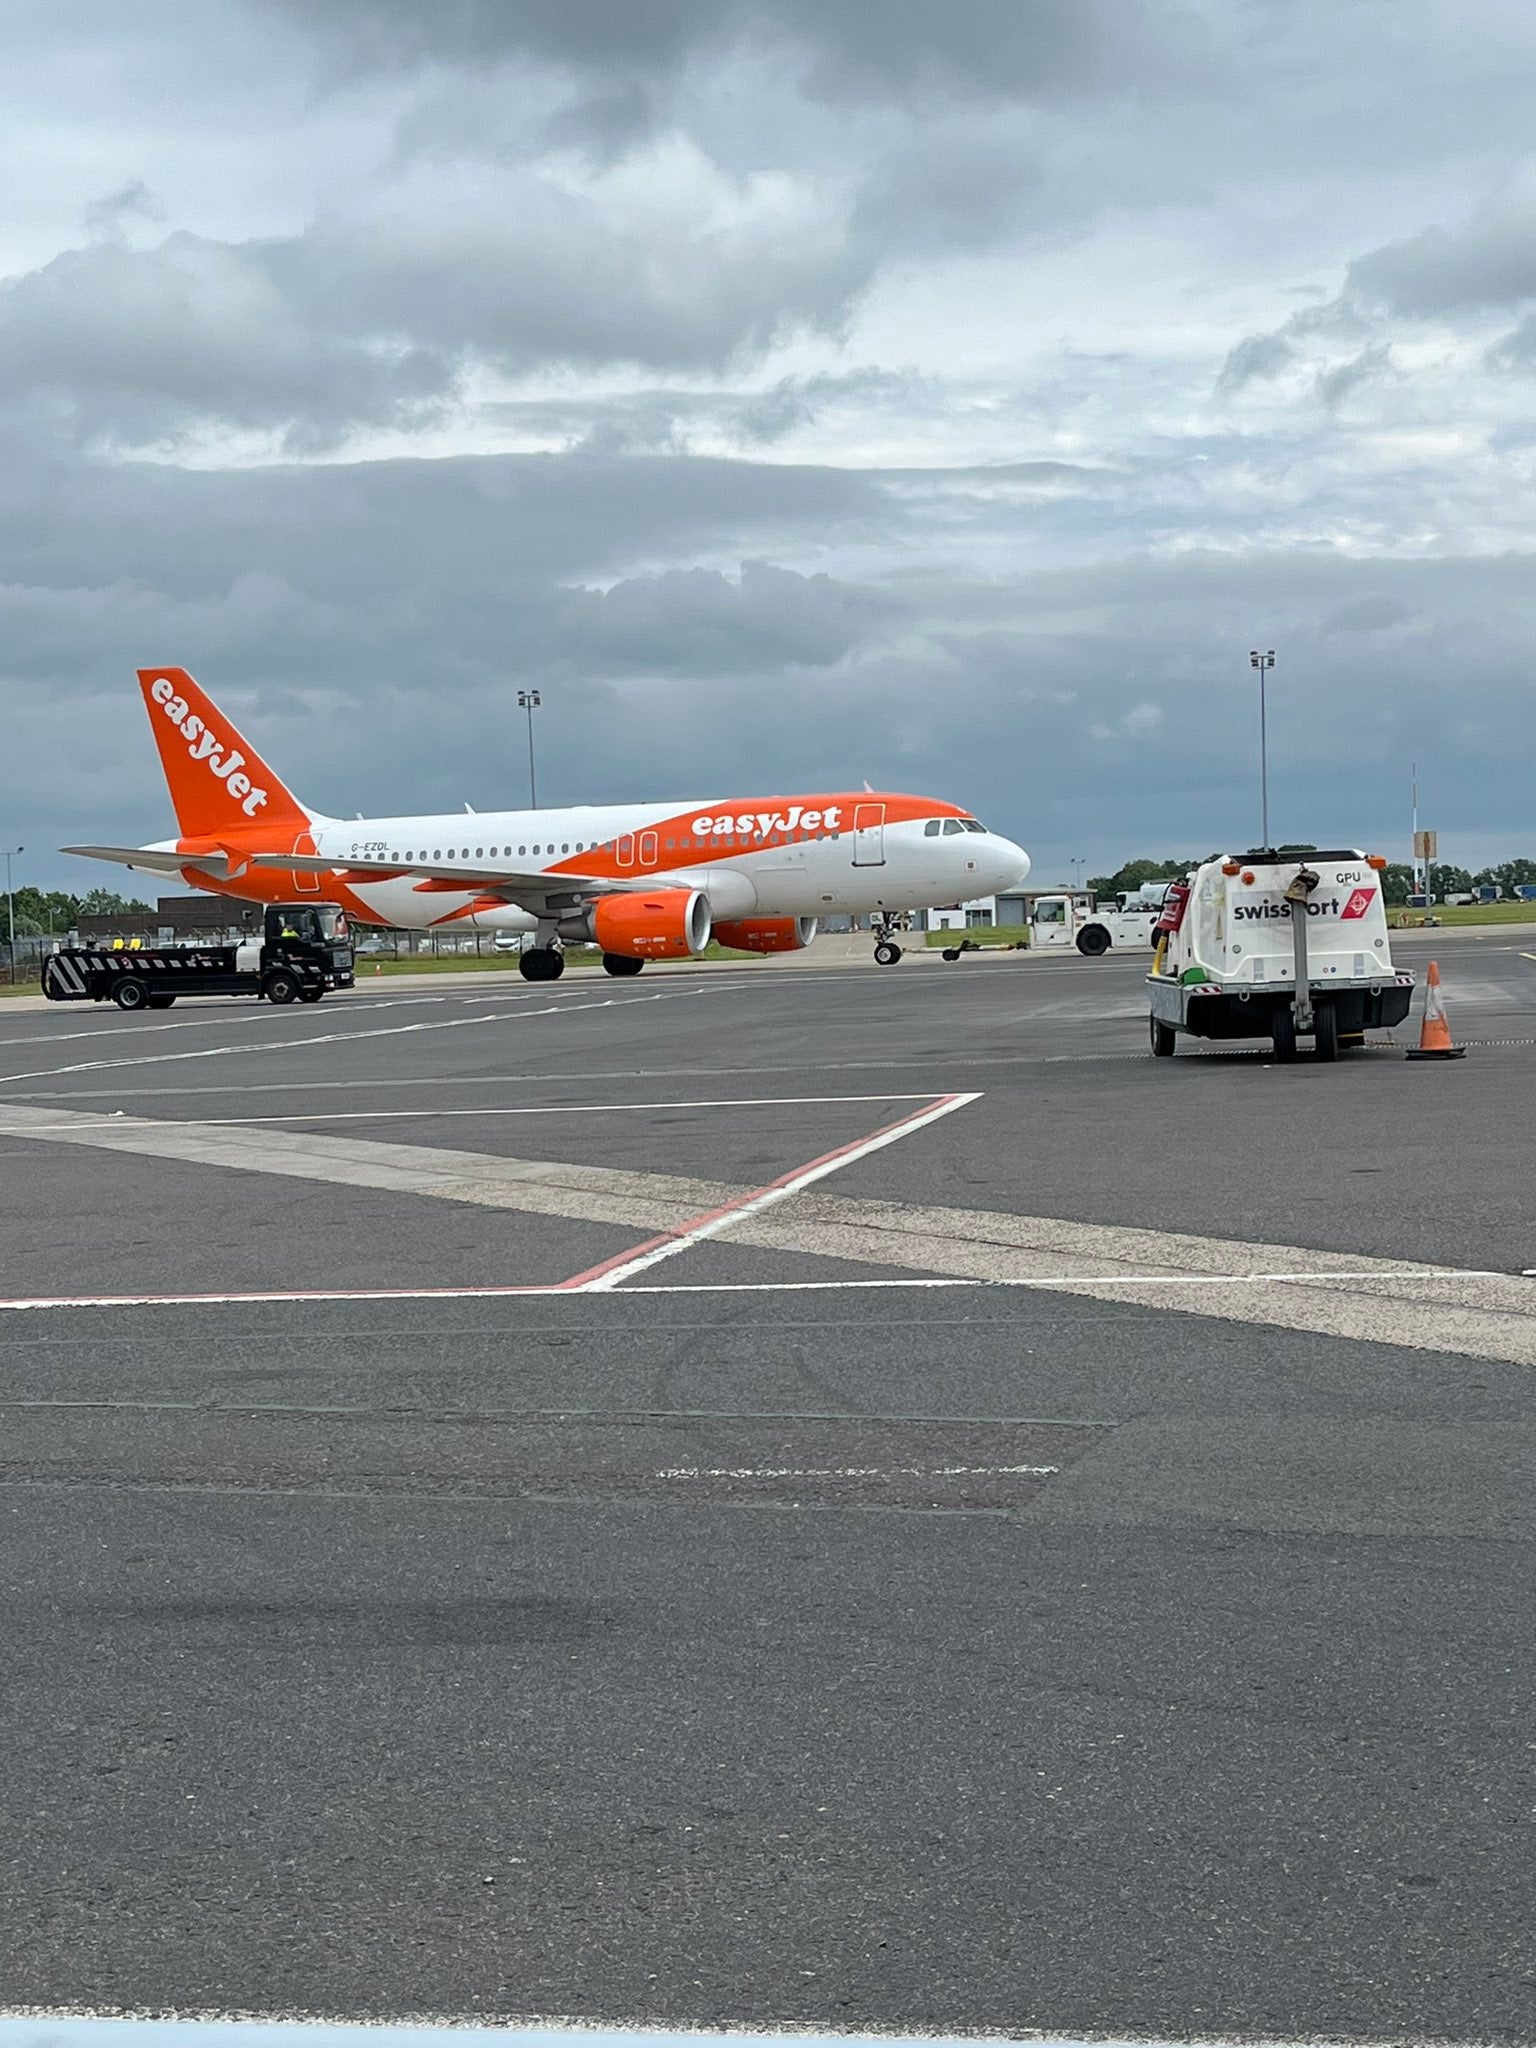 easyJet apologised for the incident and said it was investigating to find out what happened